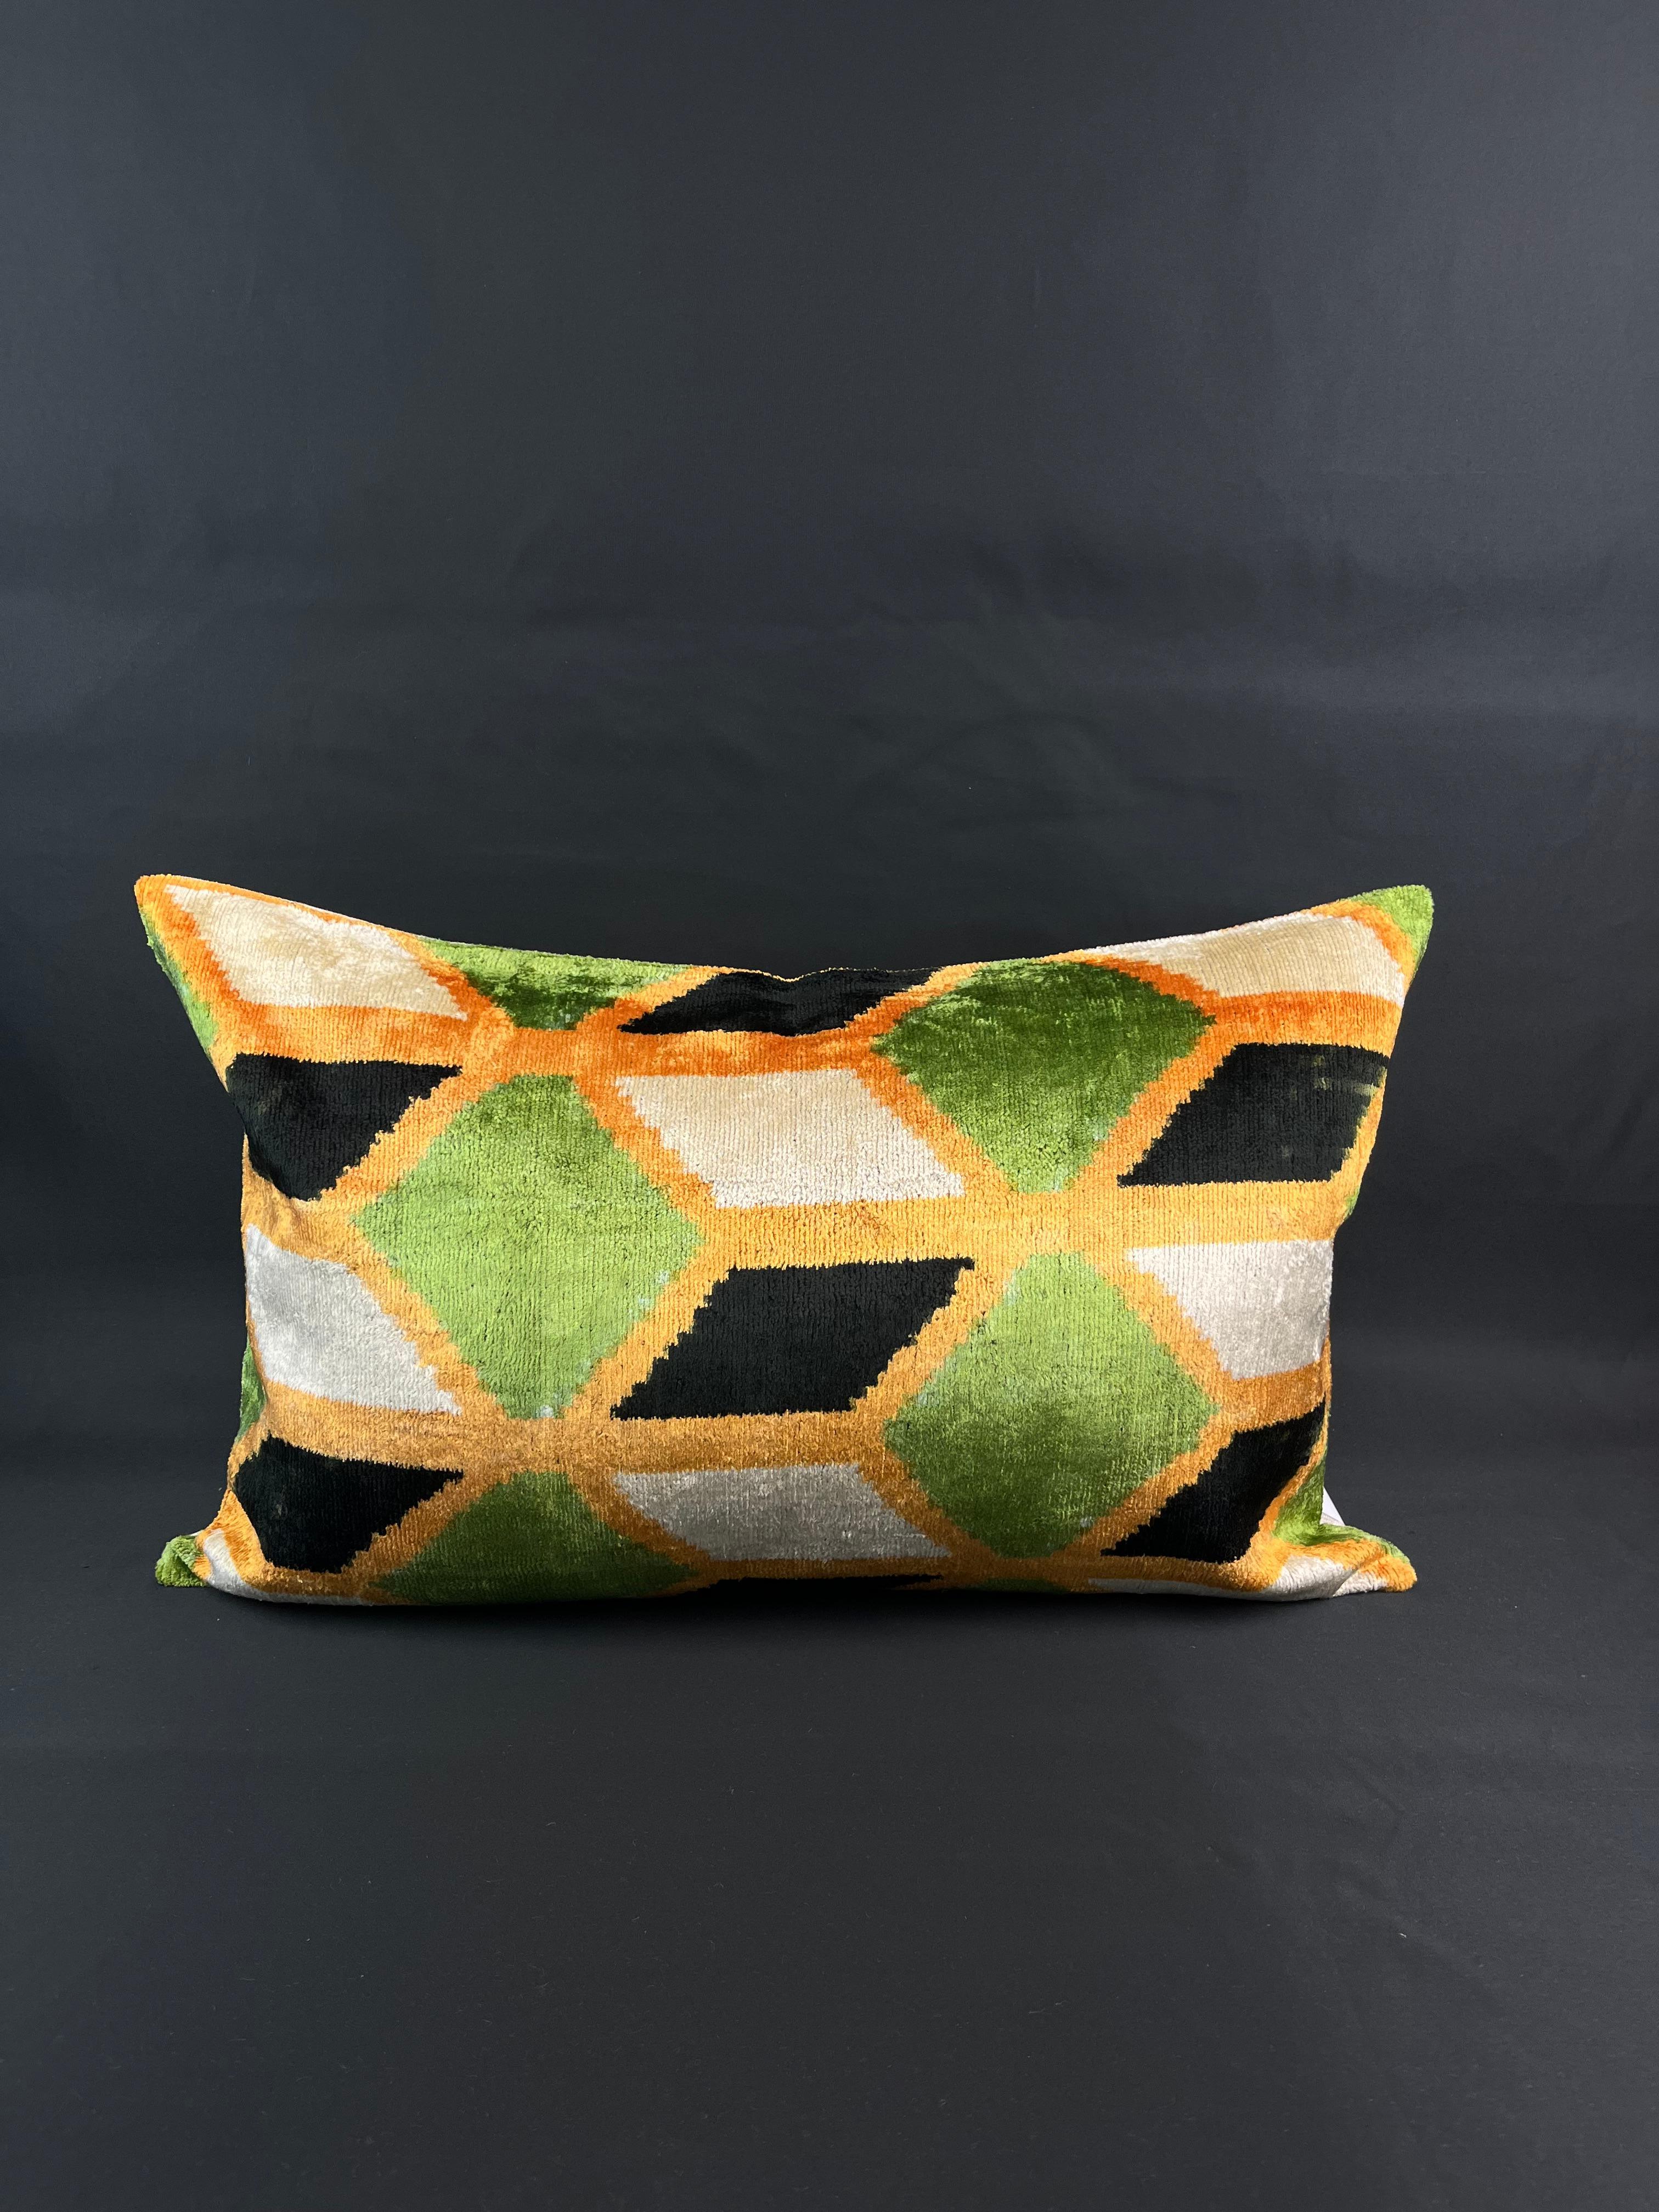 Orange and Green Velvet Silk Ikat Pillow Cover In New Condition For Sale In Houston, TX